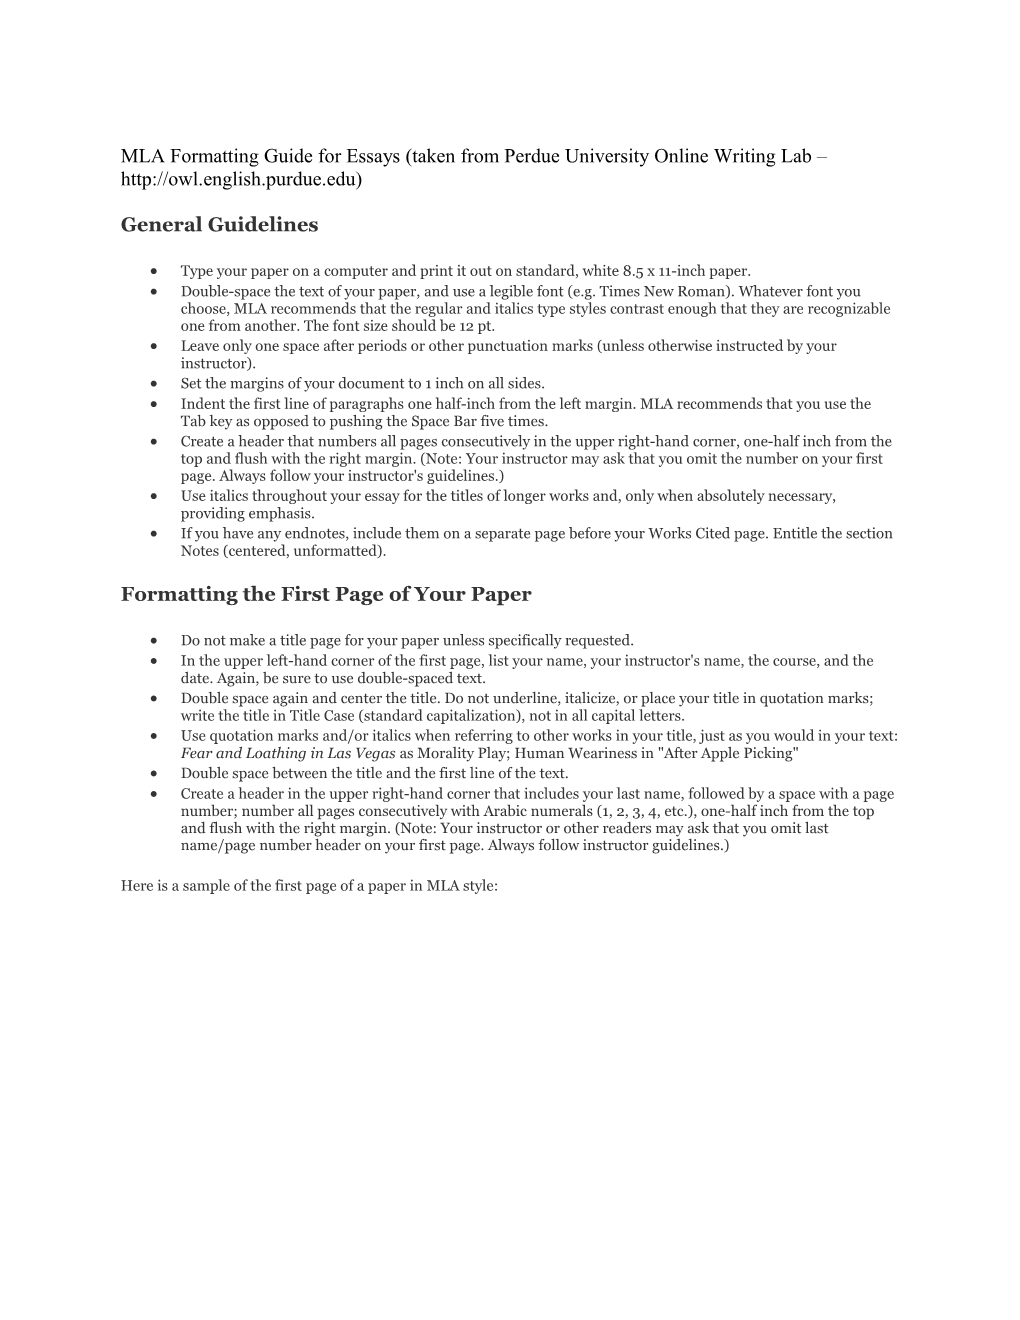 MLA Formatting Guide for Essays (Taken from Perdue University Online Writing Lab